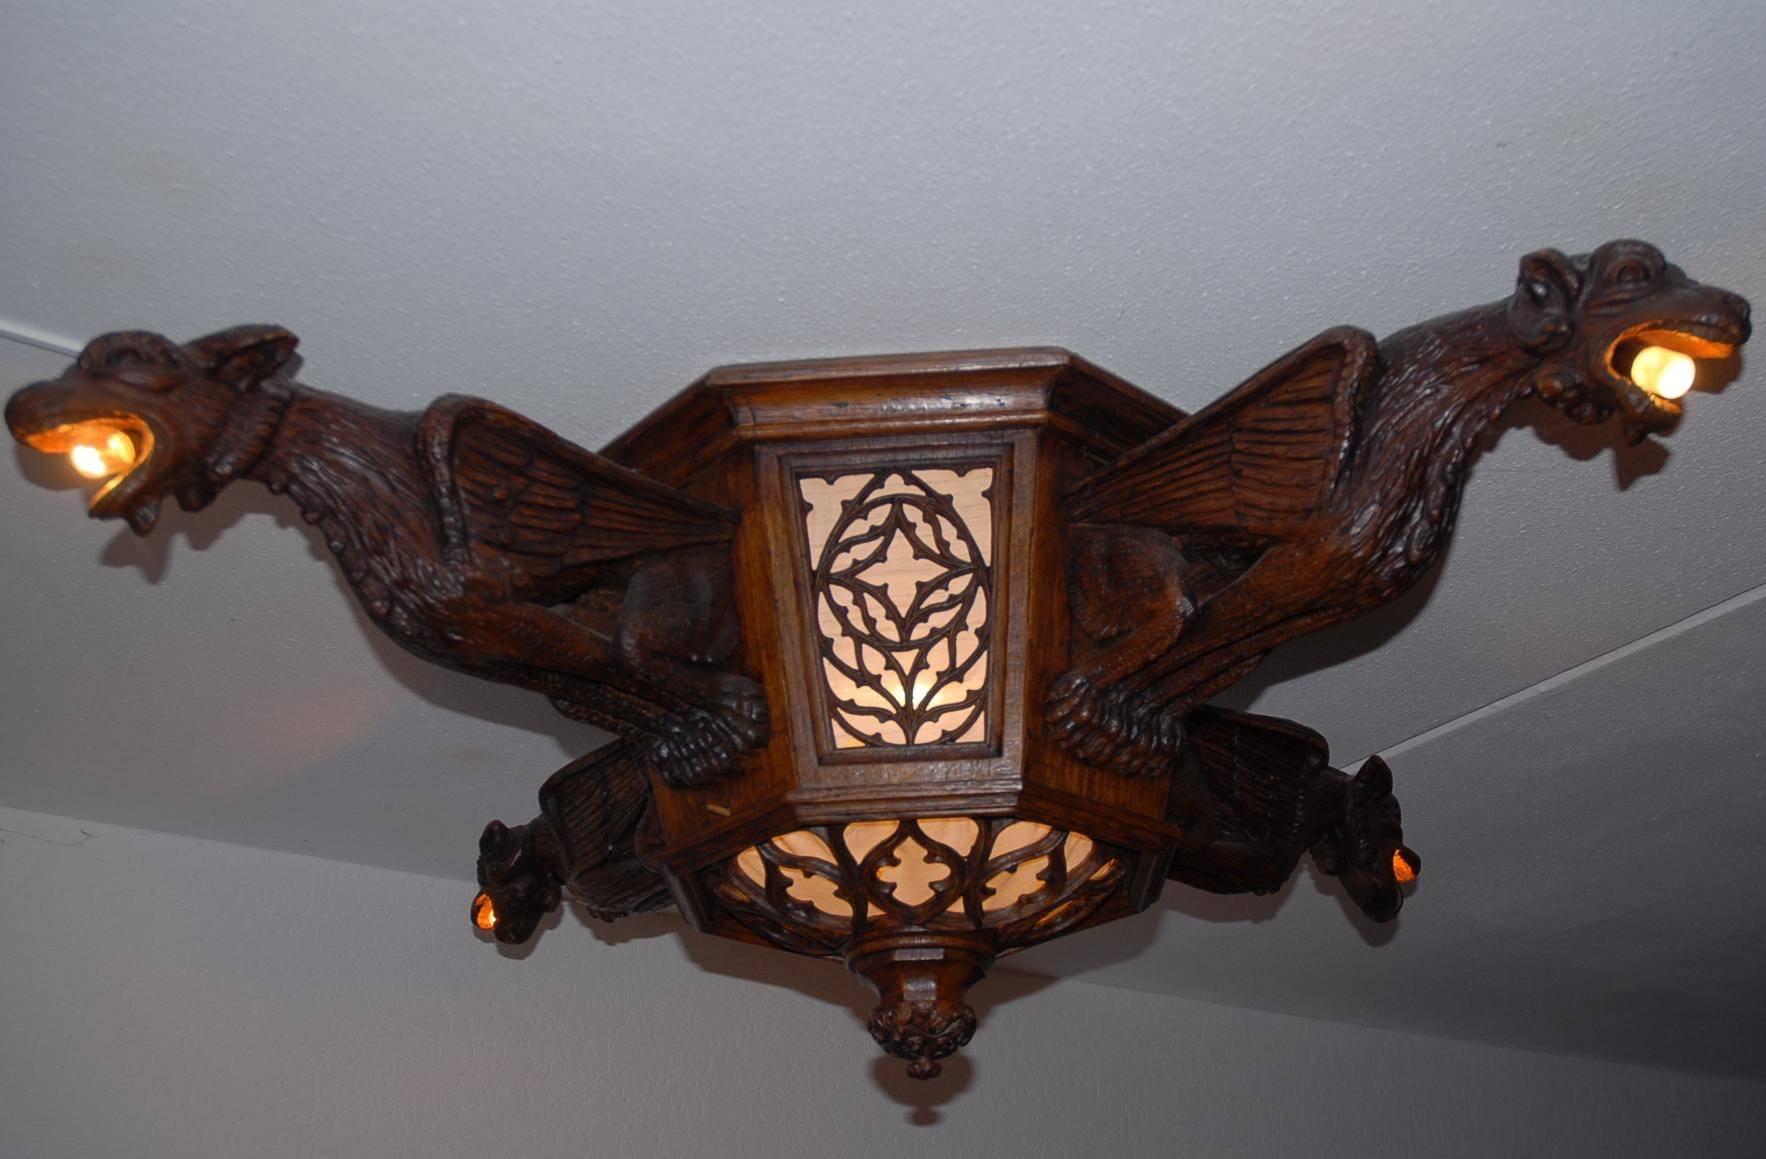 Amazing, hand-carved, Gothic Revival work of lighting art.
 
This amazing ceiling lamp did not come from your average home and finding this gem totally made our day. It is most likely that it was initially made for a church or monestry and we were